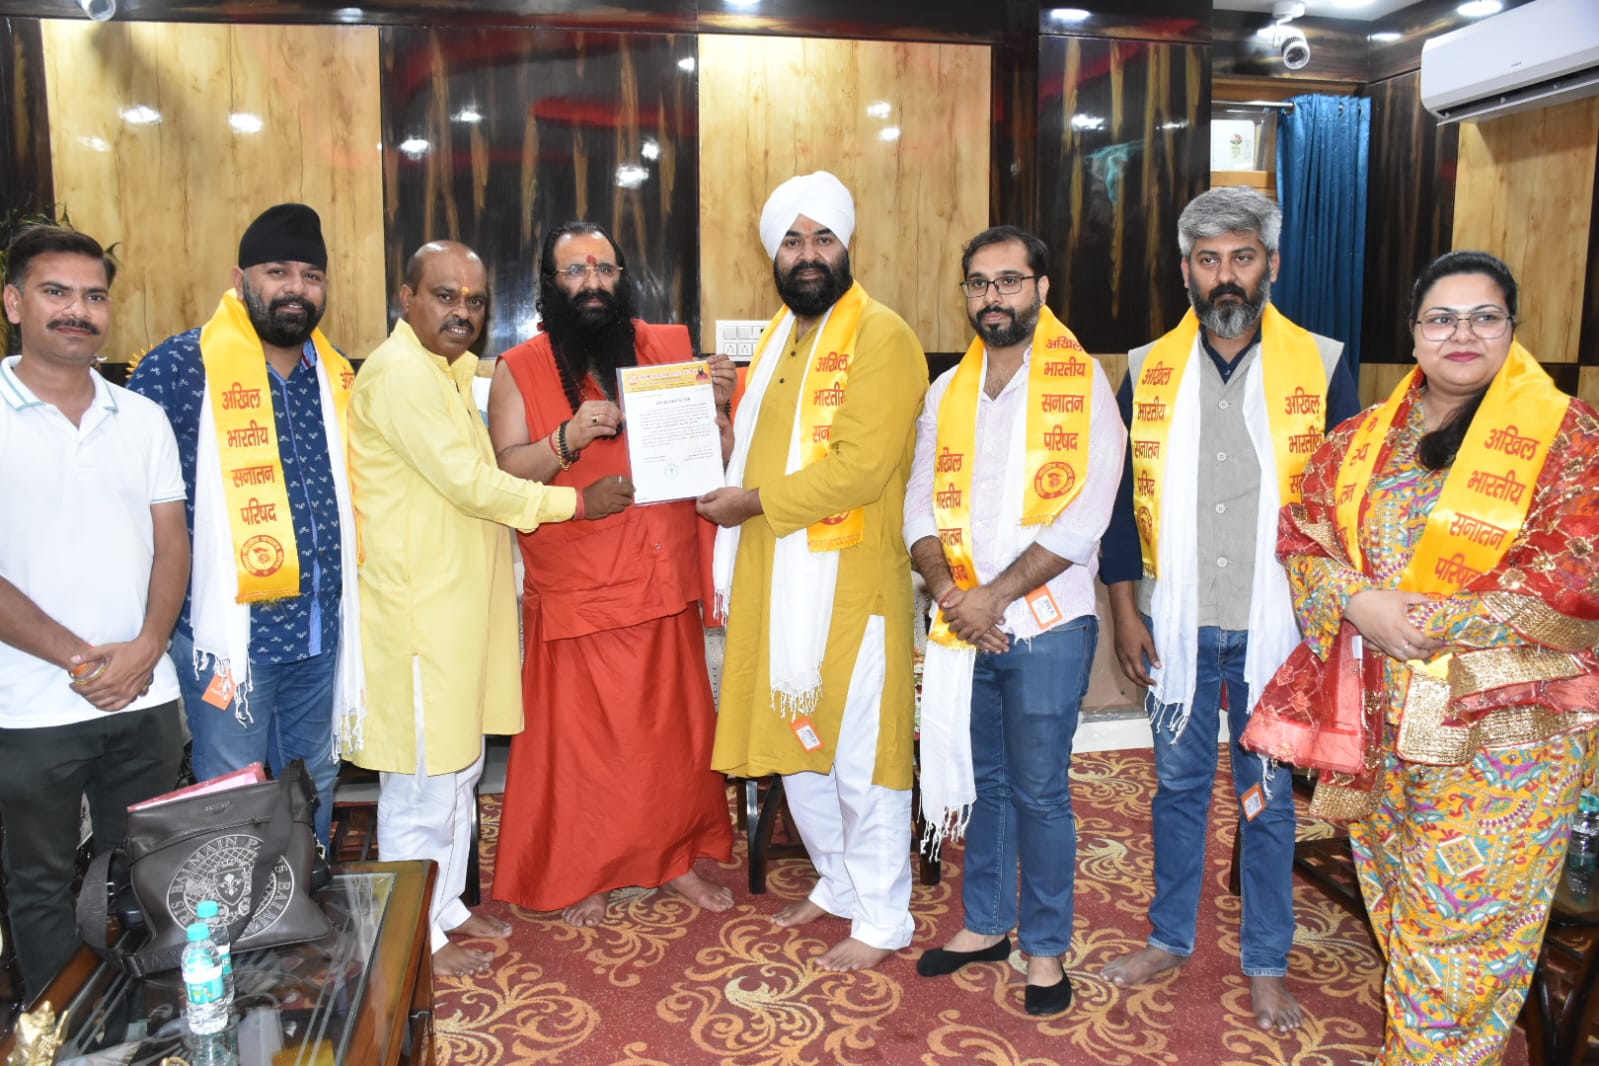 Ajit Chadha becomes South Asia and Middle East in-charge of Sanatan Parishad